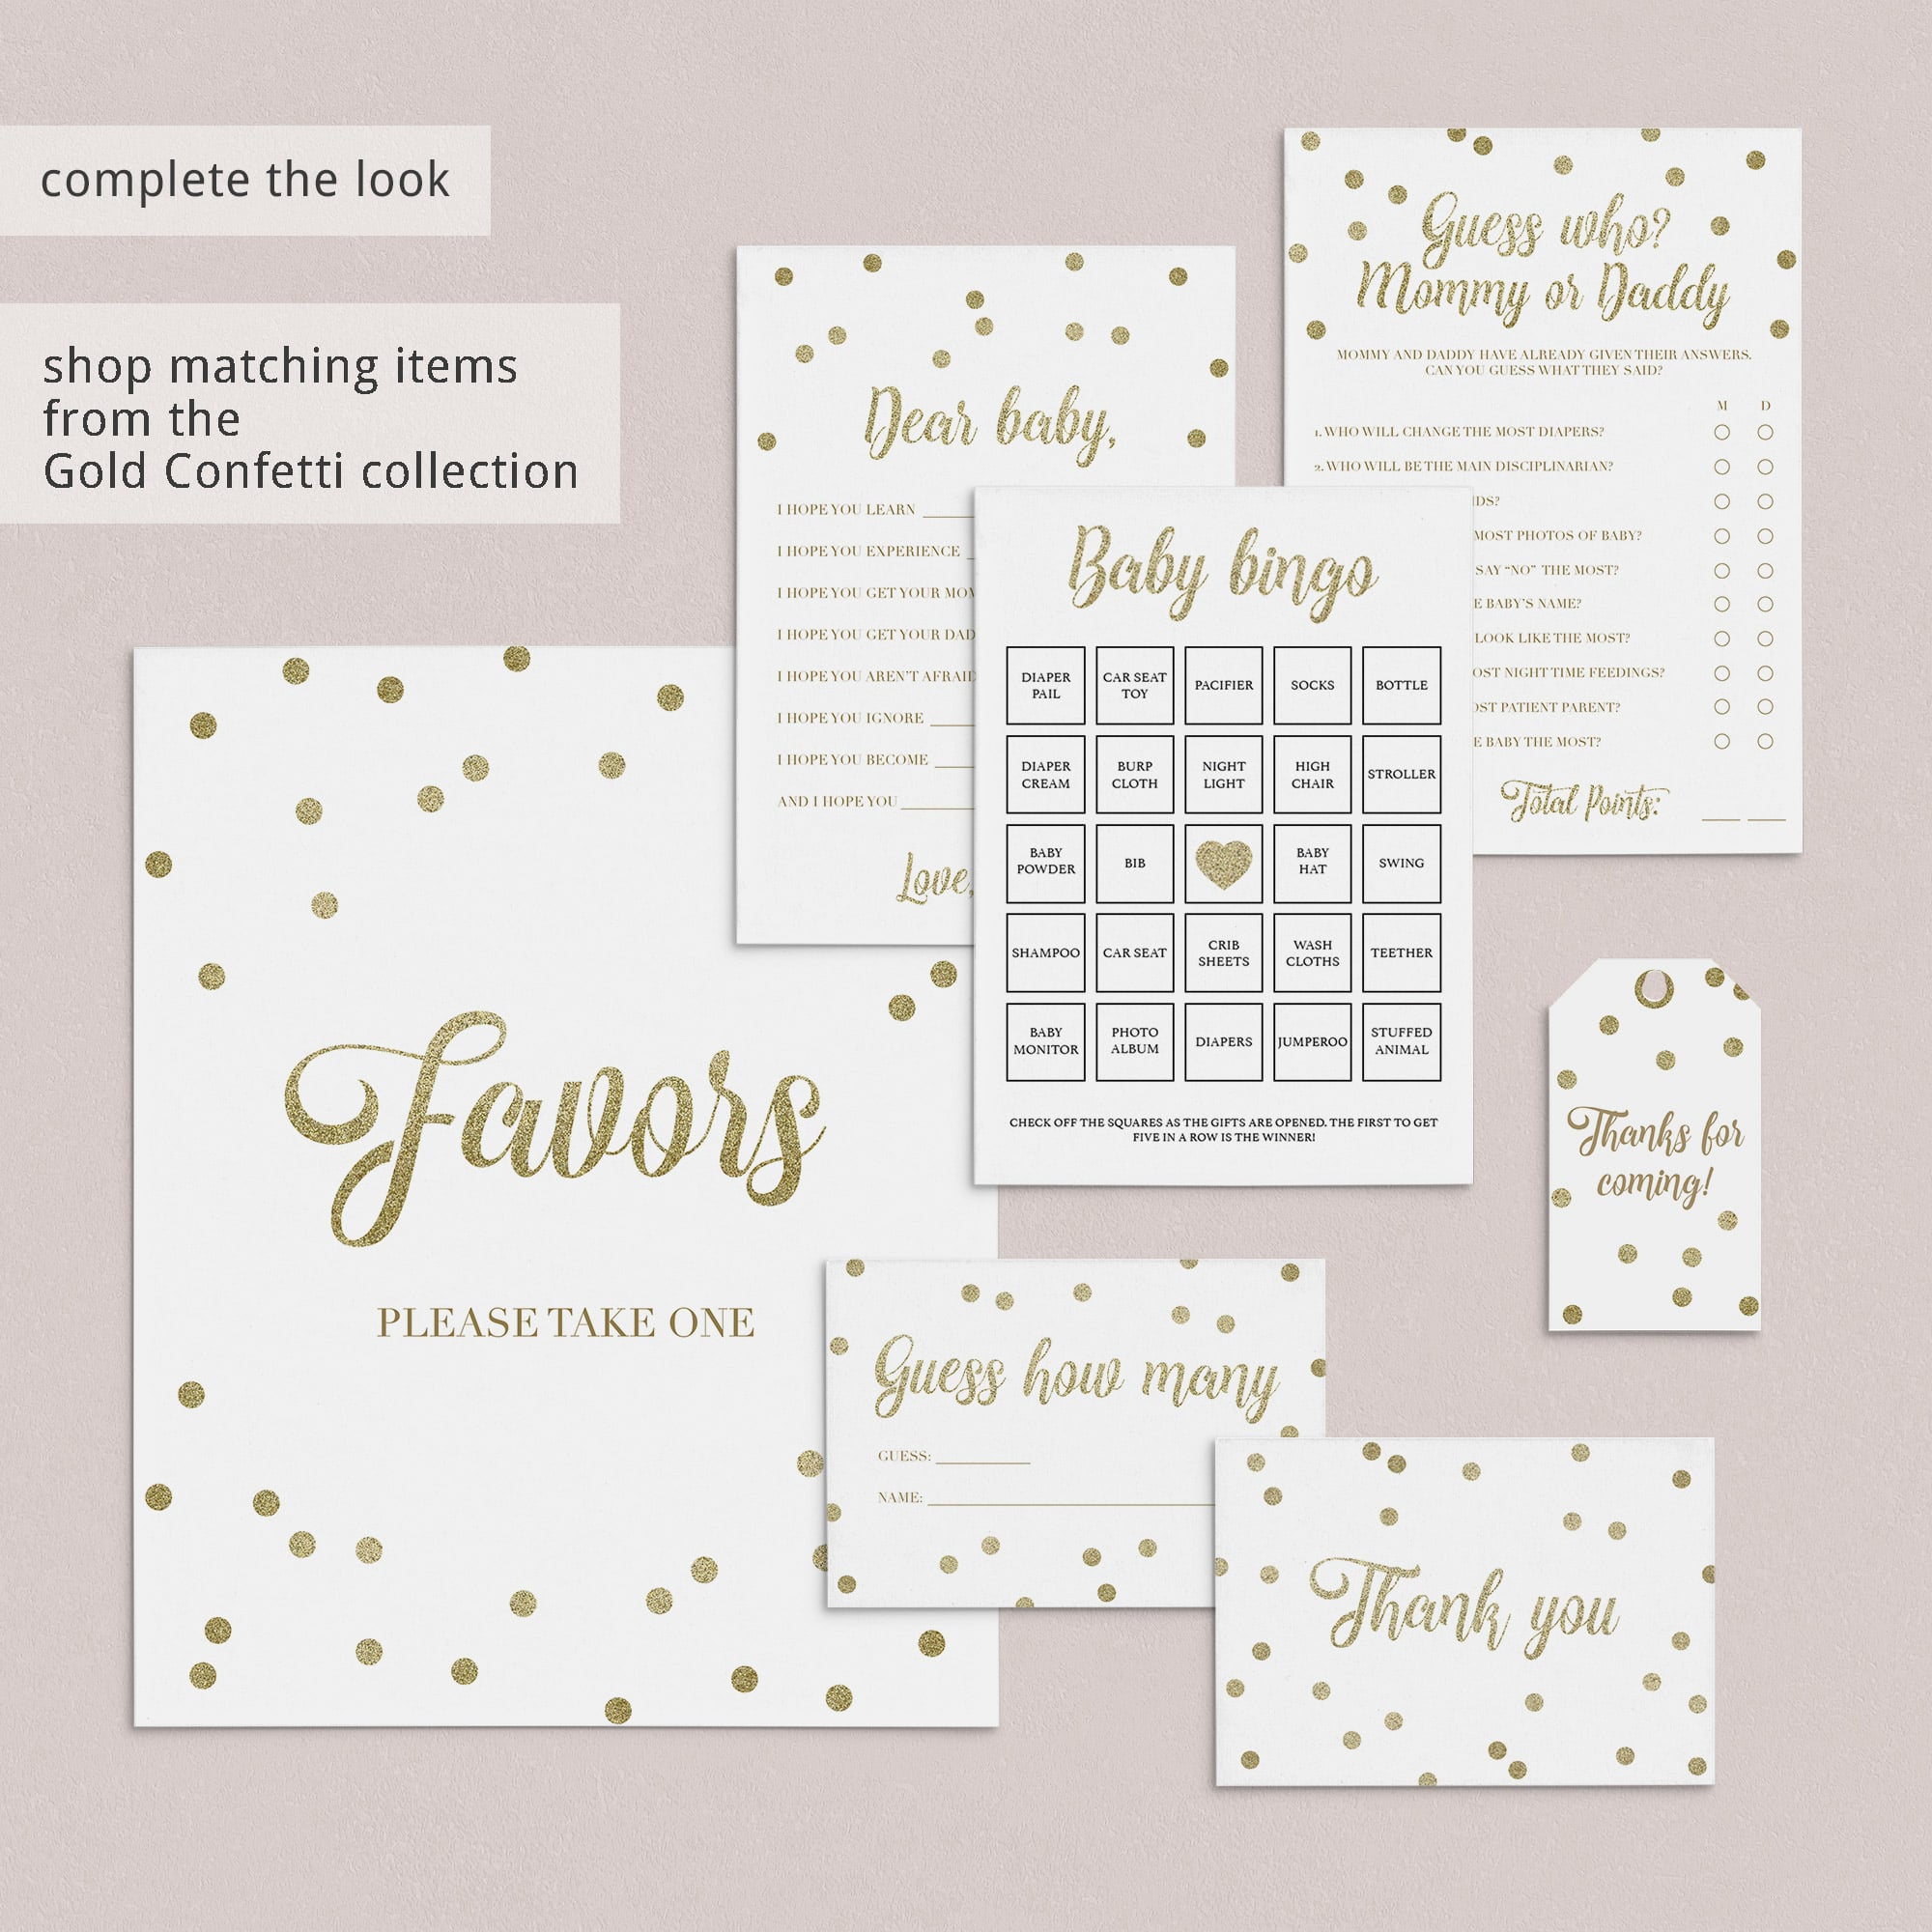 Twinkle twinkle little star baby shower games printable by LittleSizzle